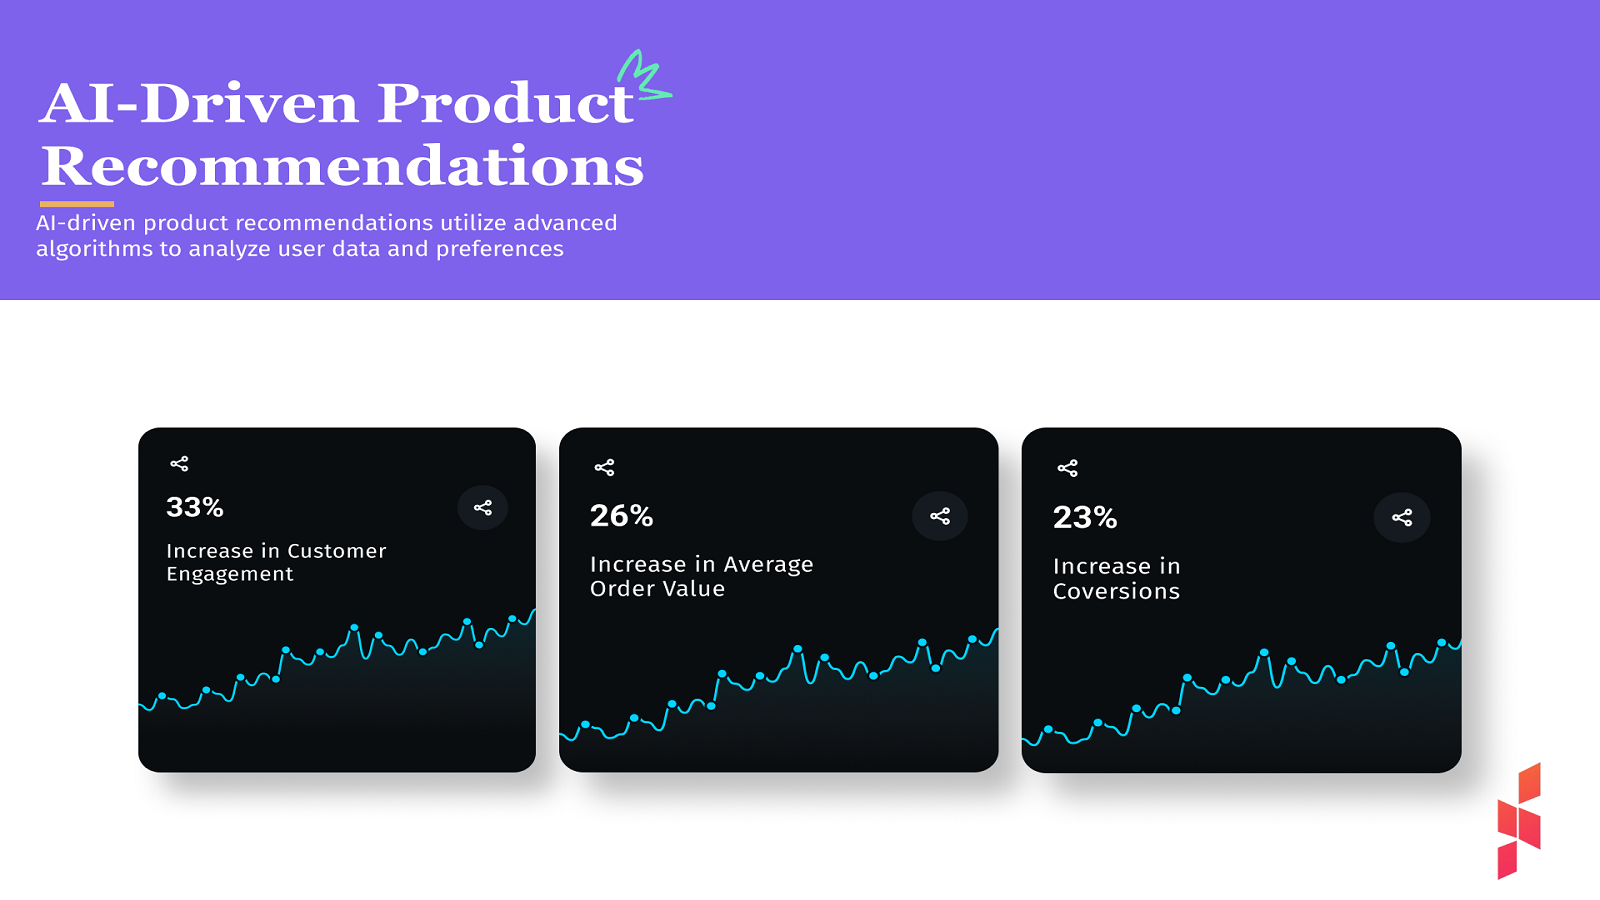 AI Driven Product recommendation